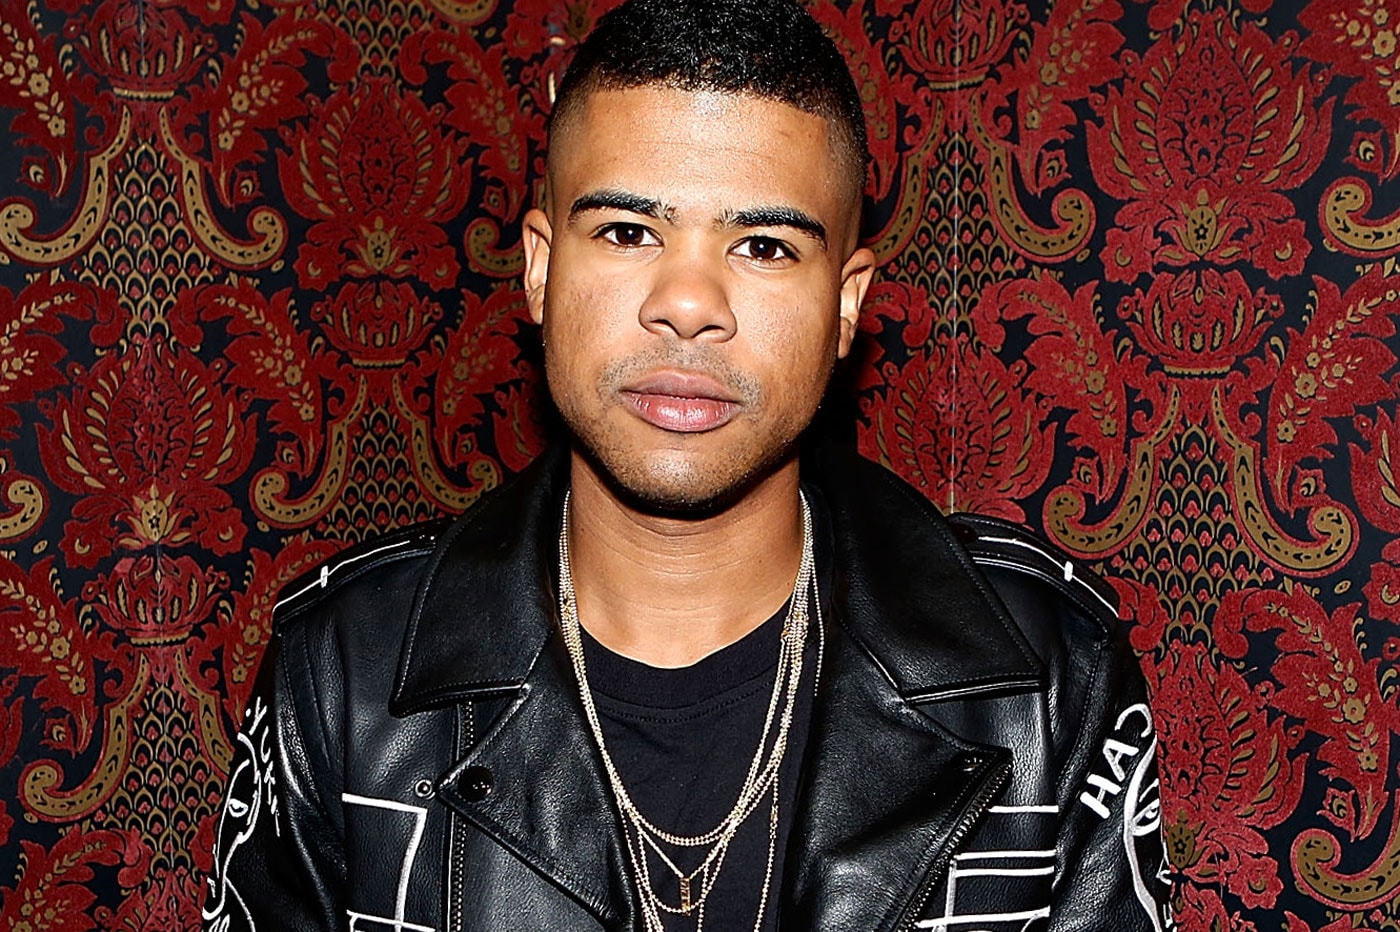 iLoveMakonnen Shares Two-Part Video for "I Remember" & "Sometimes"